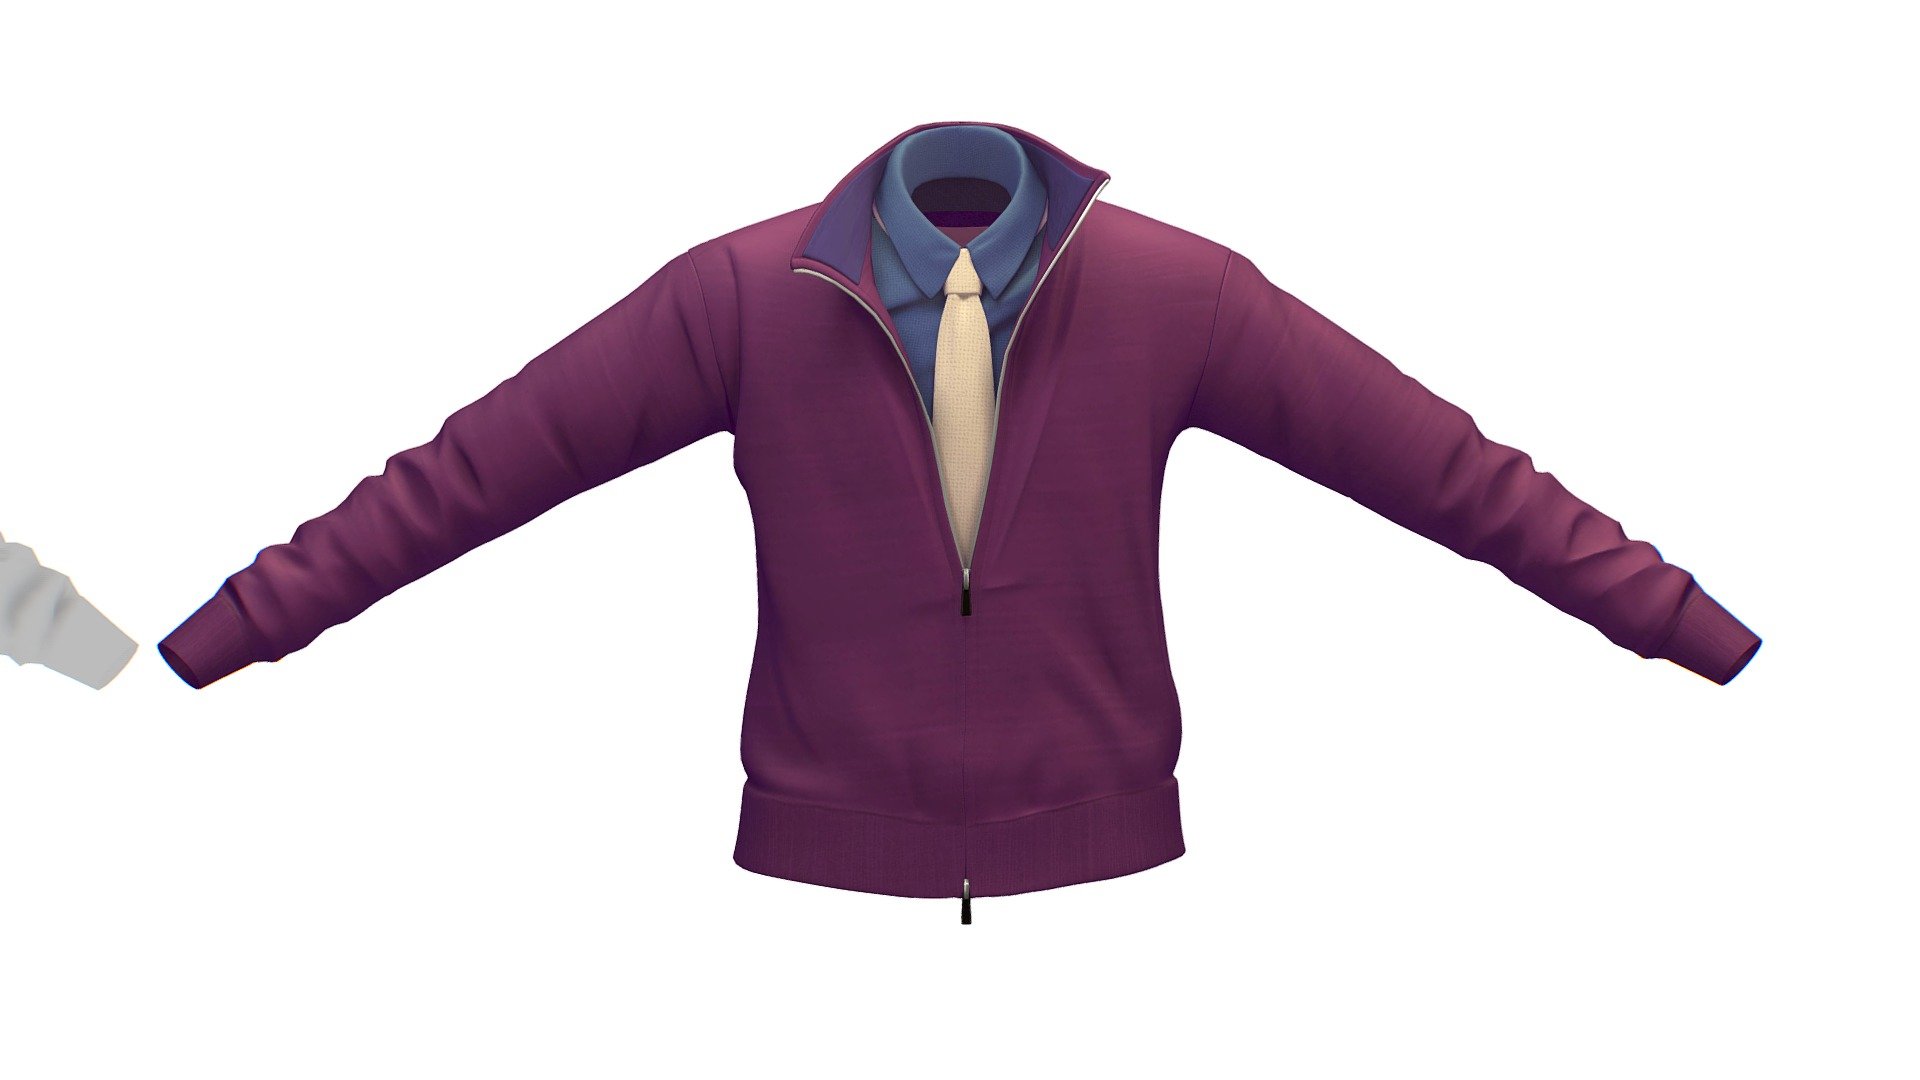 Cartoon High Poly Subdivision Purple Jacket

No HDRI map, No Light, No material settings - only Diffuse/Color Map Texture (2400x2400)

More information about the 3D model: please use the Sketchfab Model Inspector - Key (i) - Cartoon High Poly Subdivision Purple Jacket - Buy Royalty Free 3D model by Oleg Shuldiakov (@olegshuldiakov) 3d model